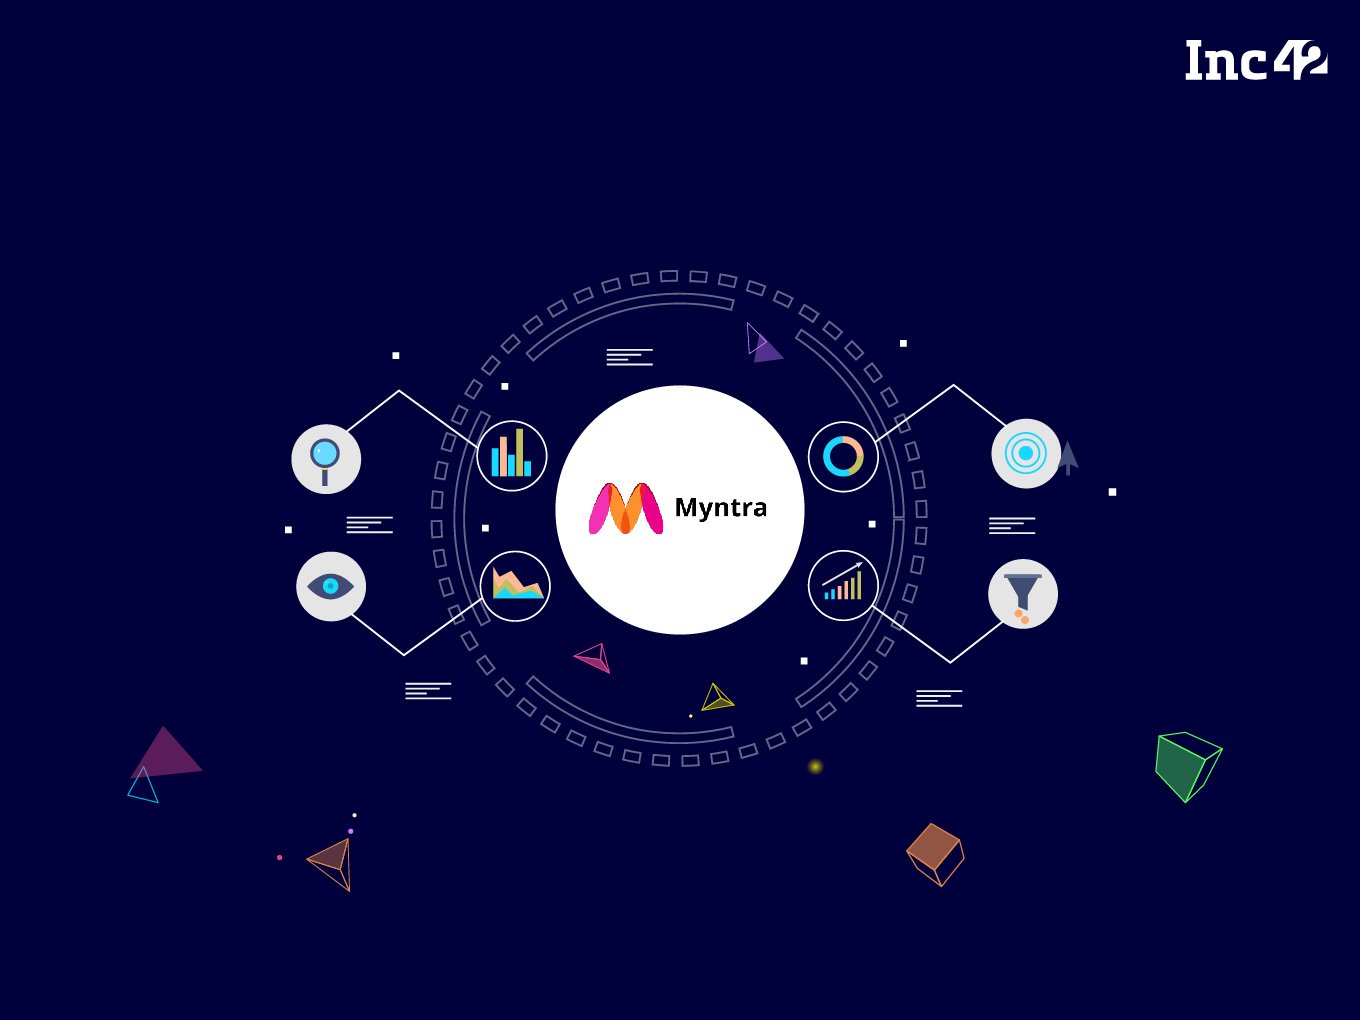 [What The Financials] Myntra’s First Year With Walmart Brings Major Revenue Growth